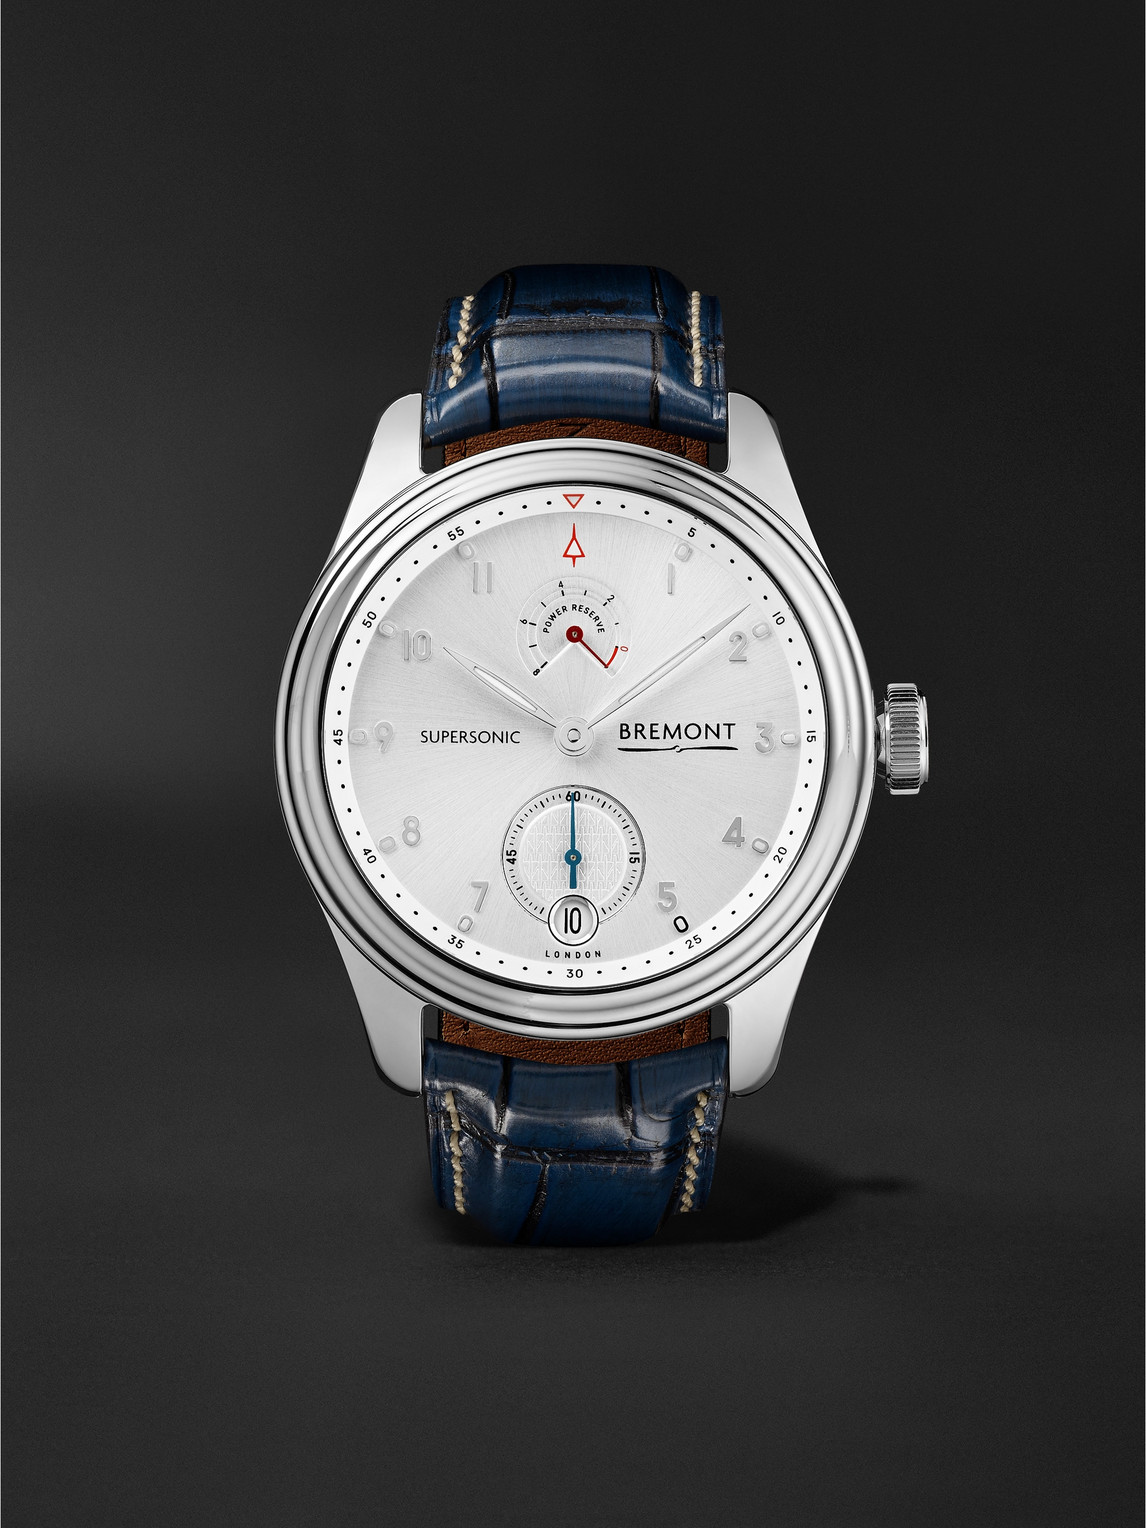 Bremont Supersonic Limited Edition Hand-wound 43mm White Gold And Alligator Watch, Ref. No. Supersonic/wg In Silver